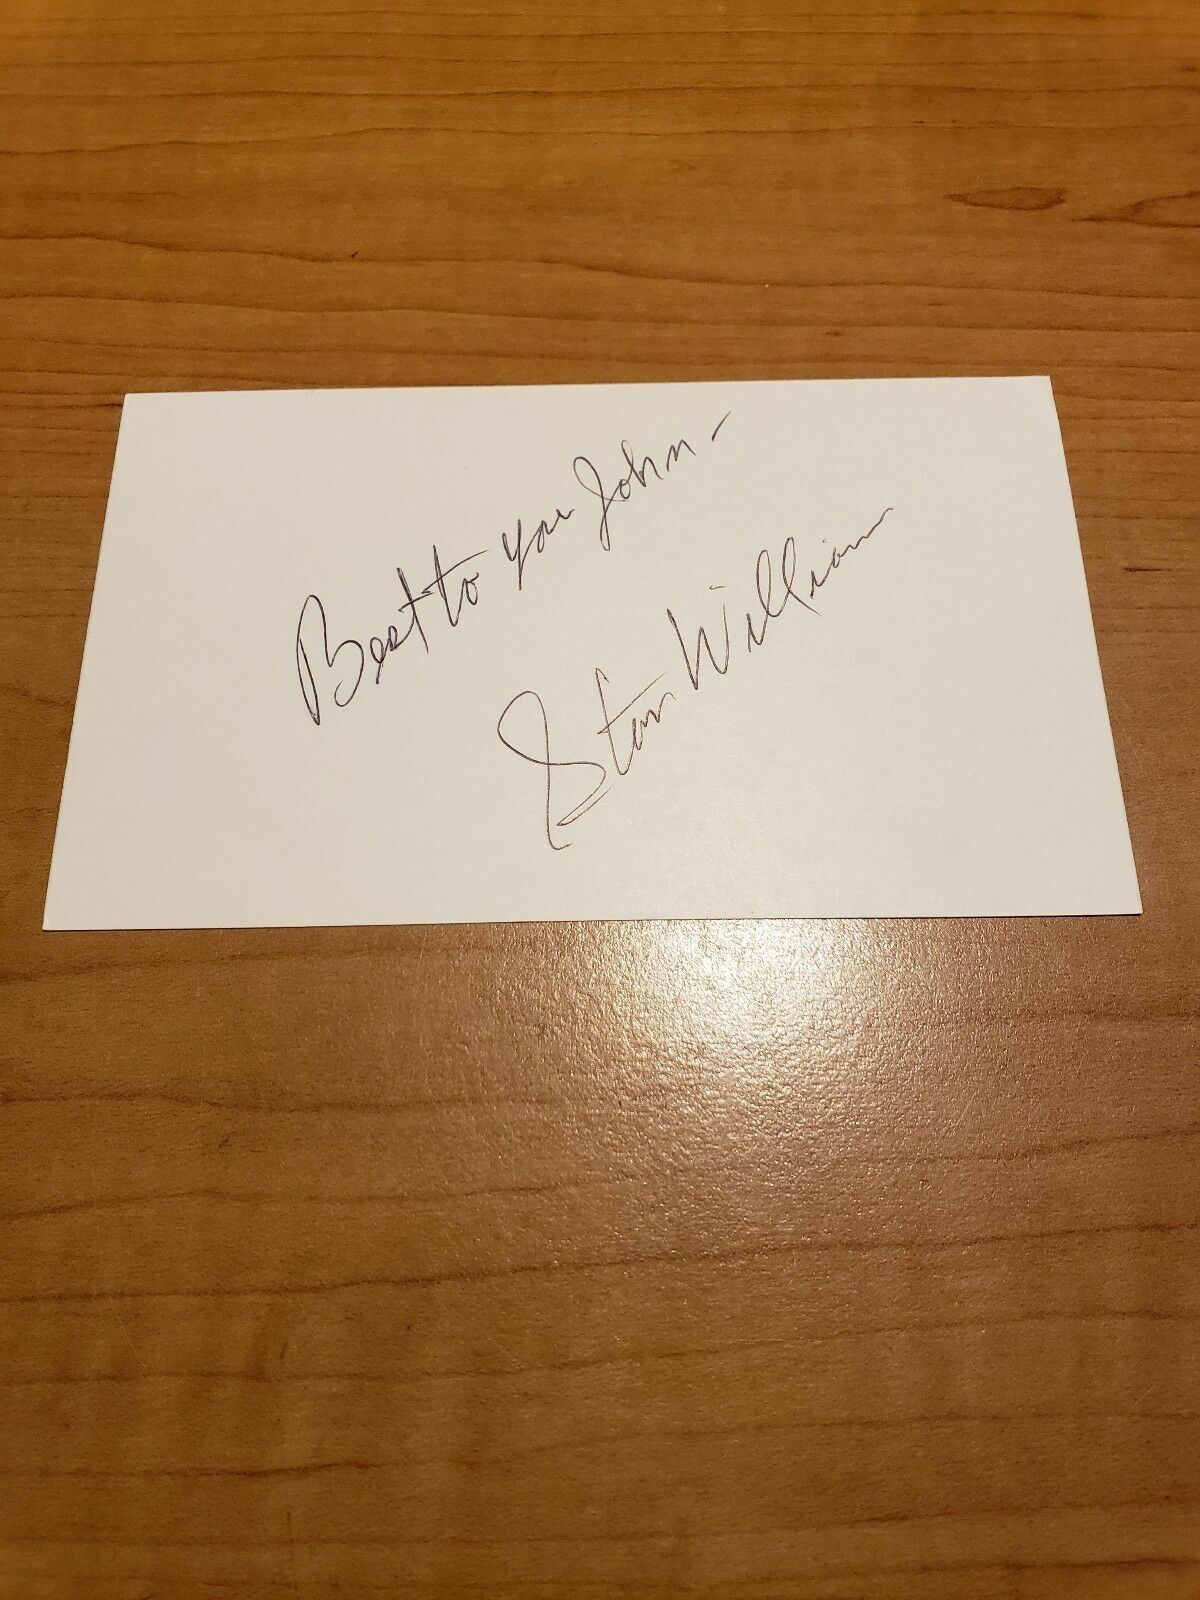 STAN WILLIAMS - FOOTBALL - AUTOGRAPH SIGNED - INDEX CARD -AUTHENTIC - A4619